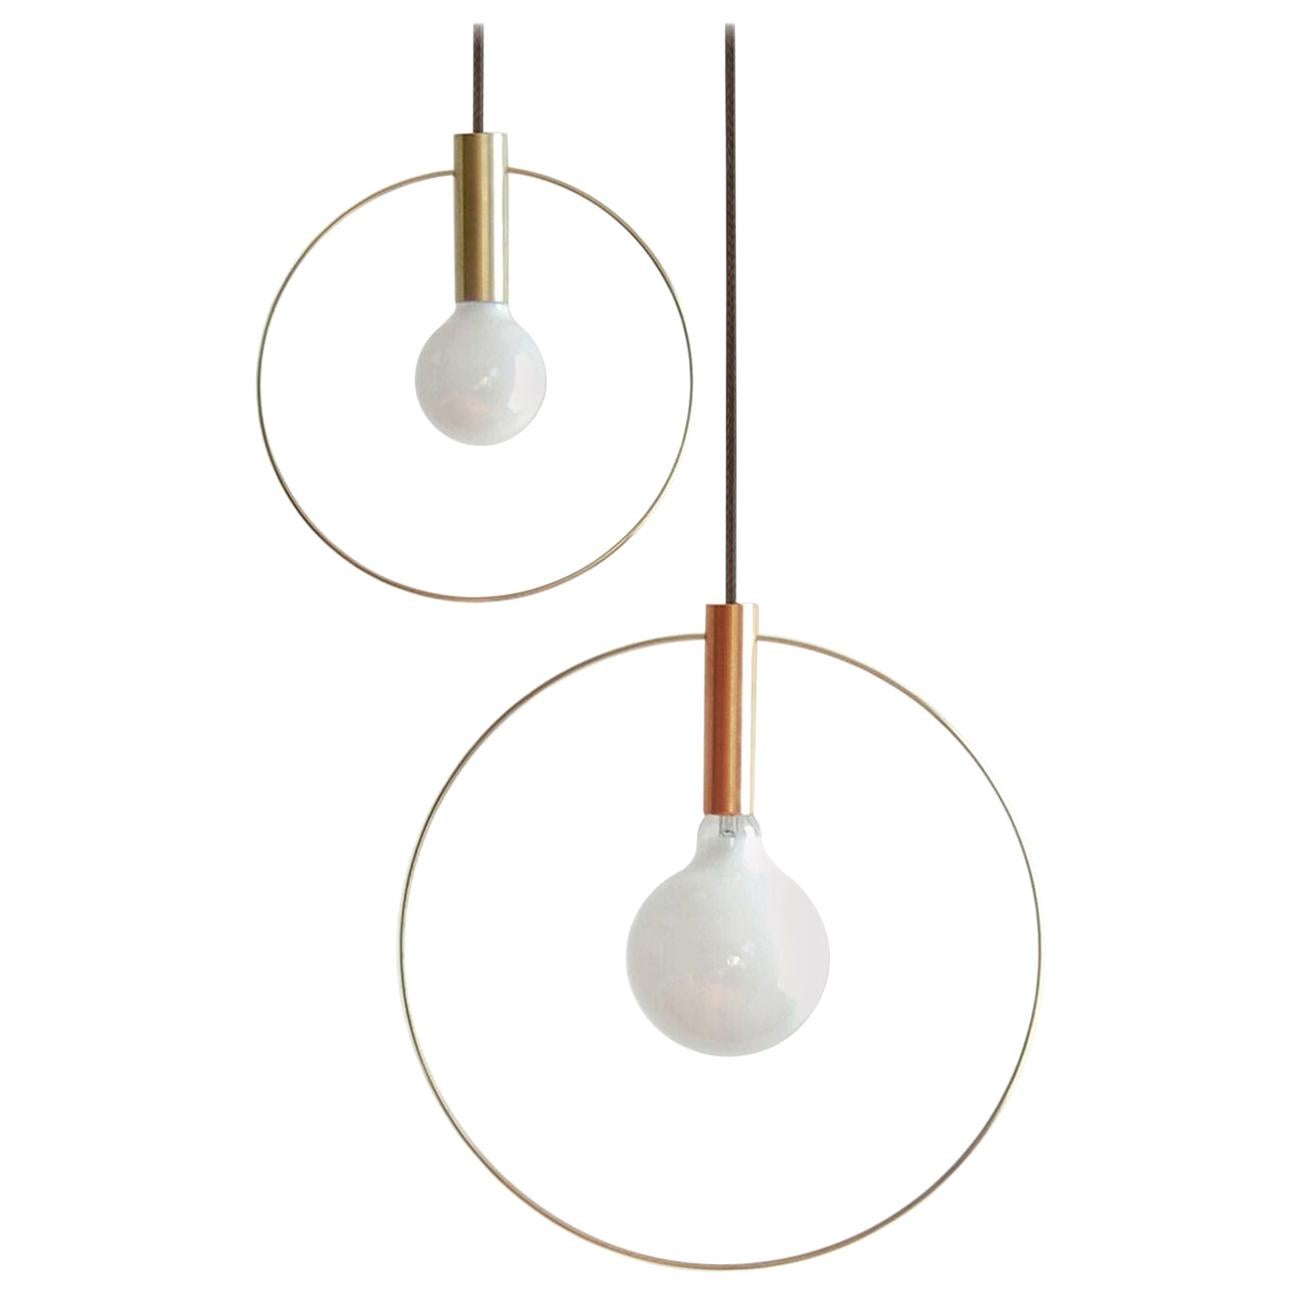 Aura 15” Pendant Light with Brass Ring and Copper or Brass Stem